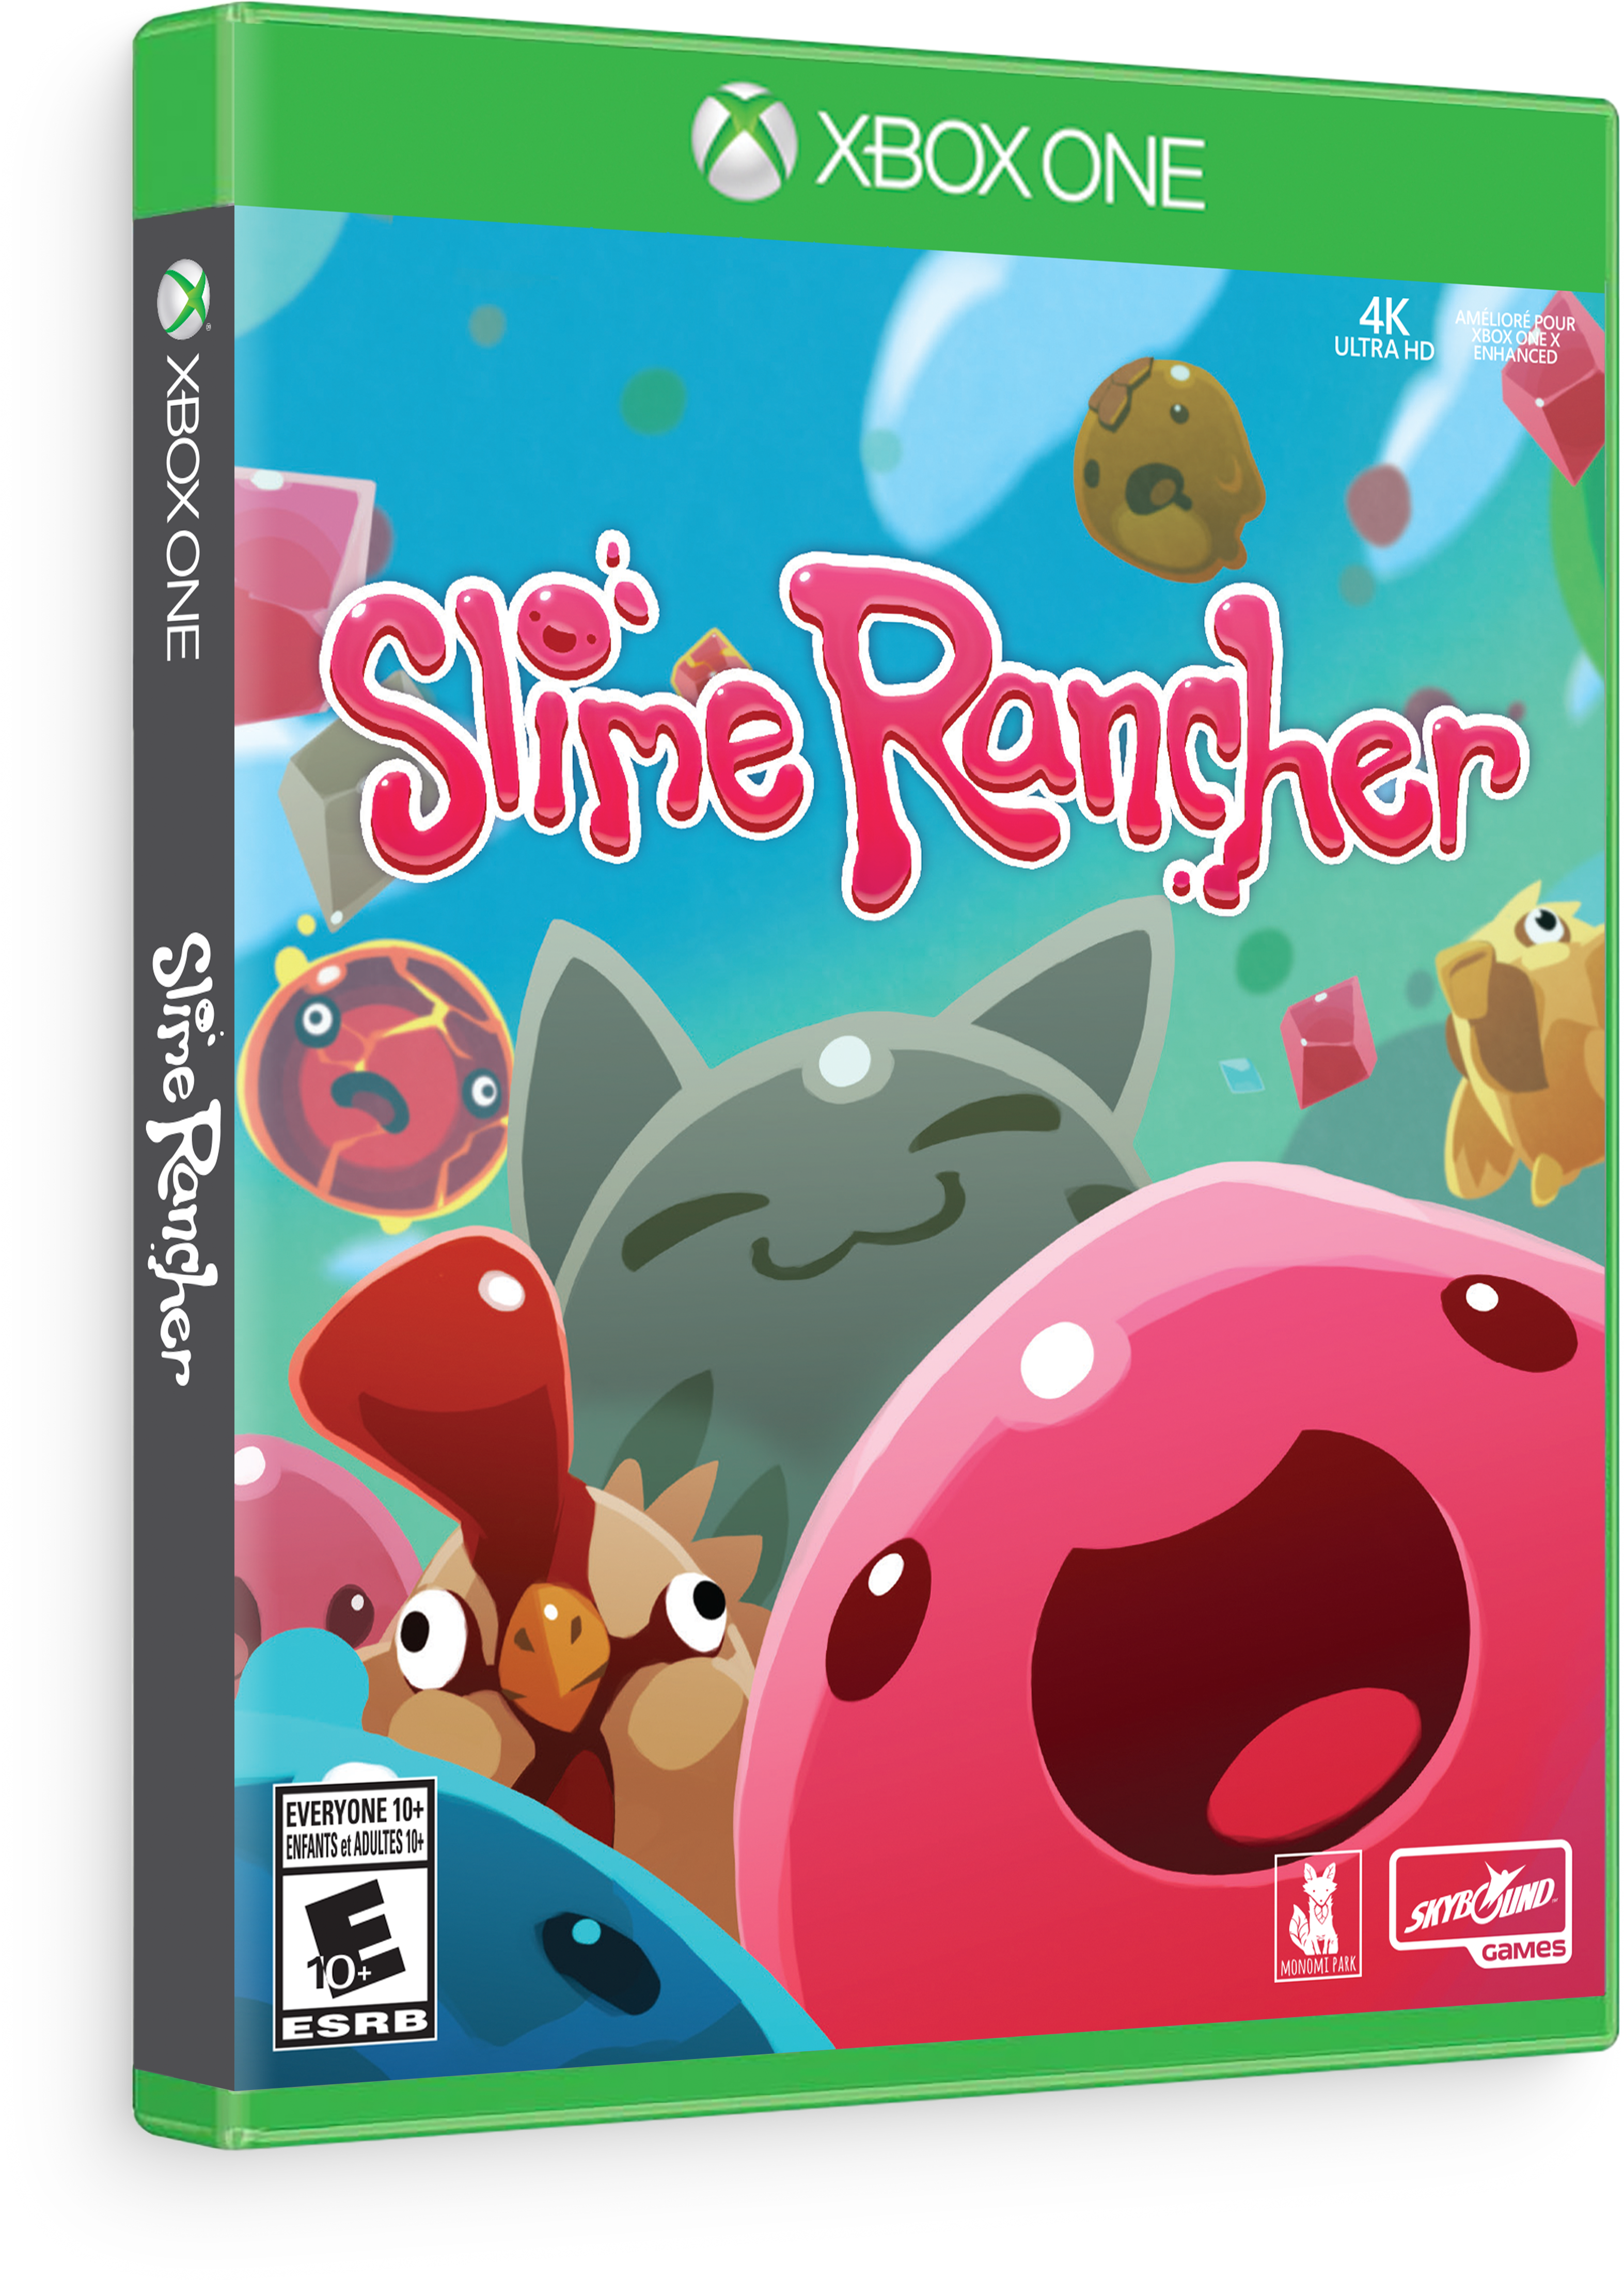 Slime Rancher: Deluxe Edition Physical Launch April 7 for PS4 and